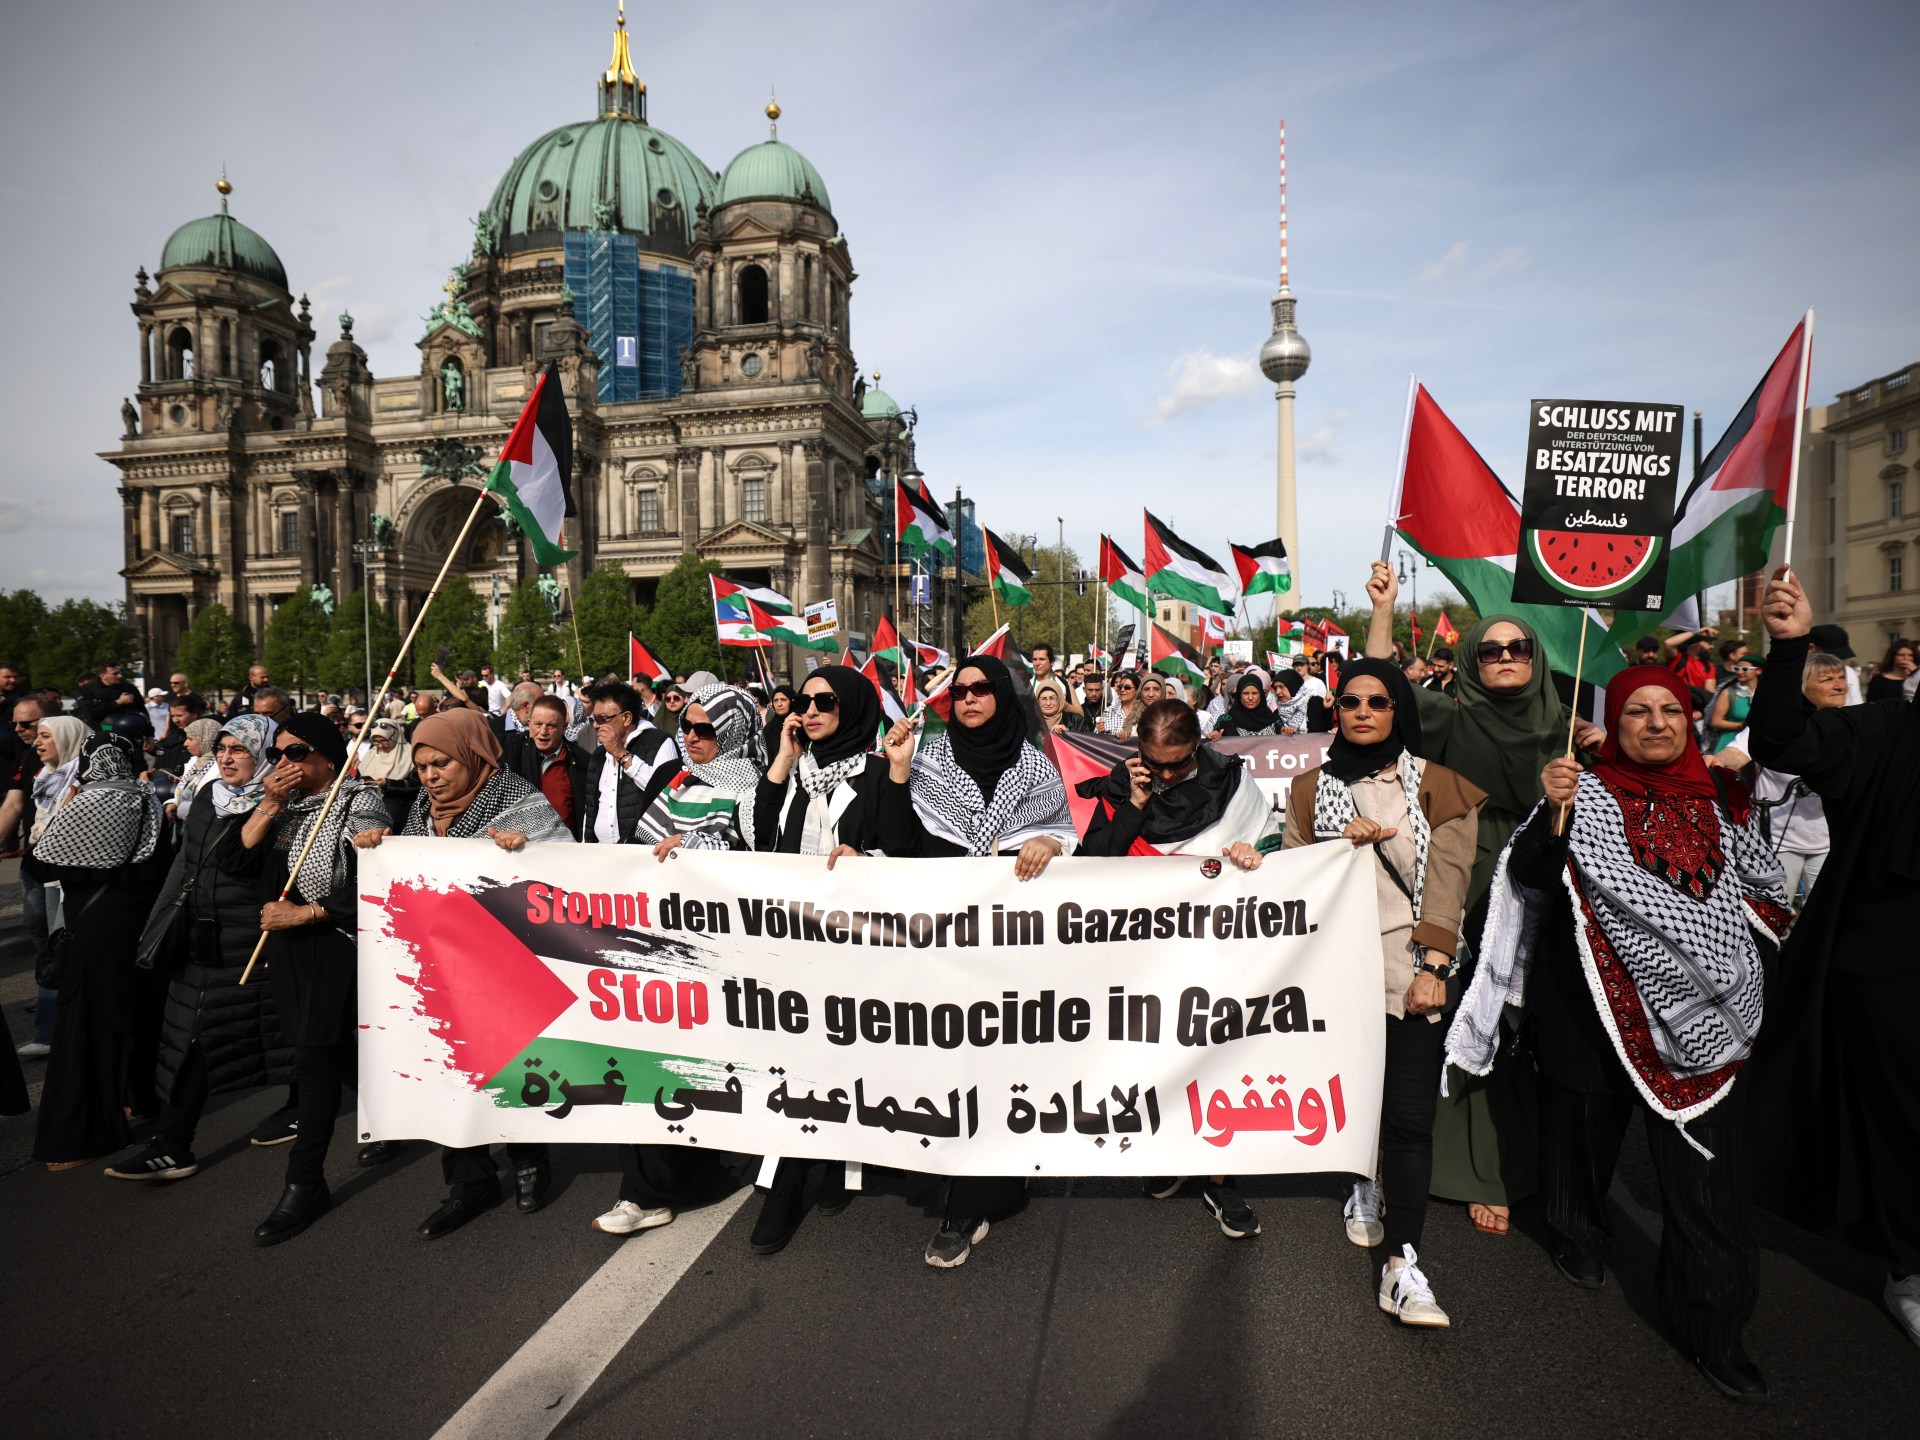 Germany’s crackdown on criticism of Israel betrays European values | Opinions